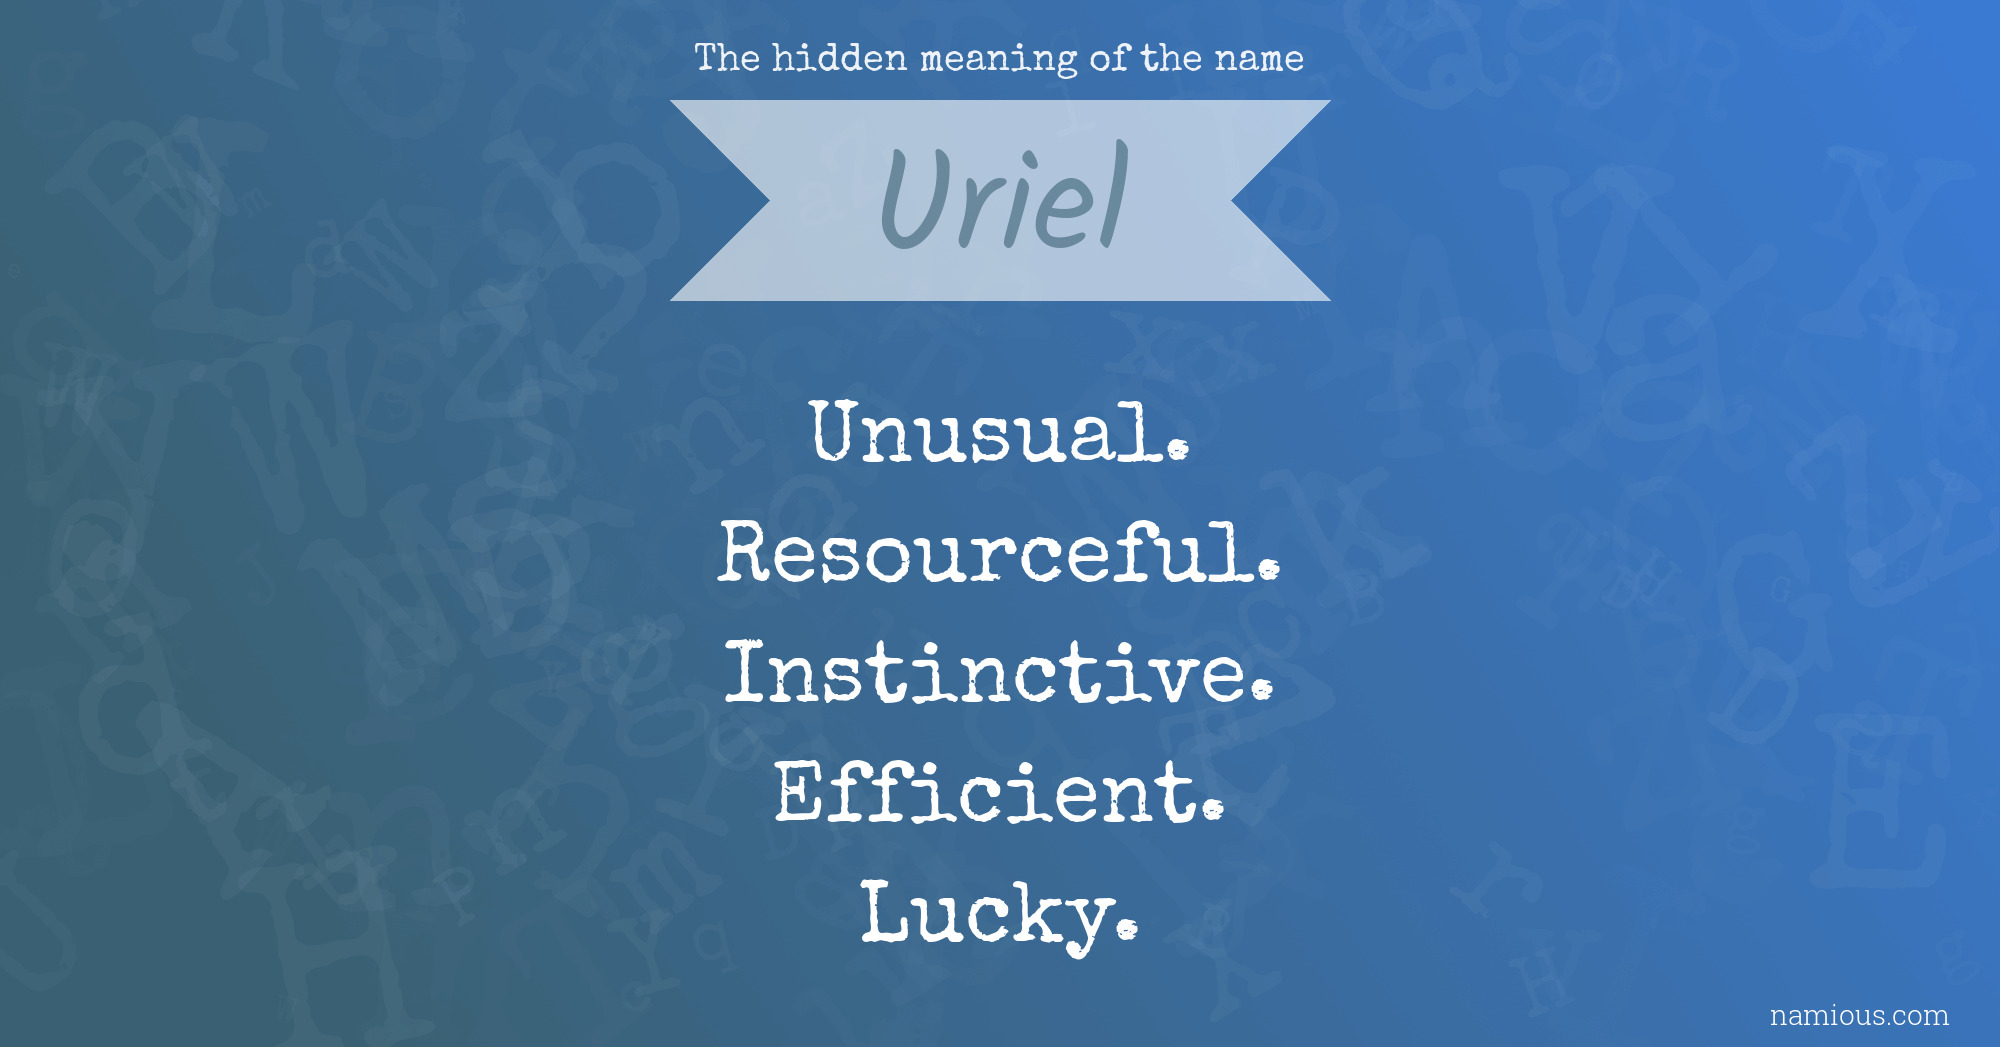 The hidden meaning of the name Uriel